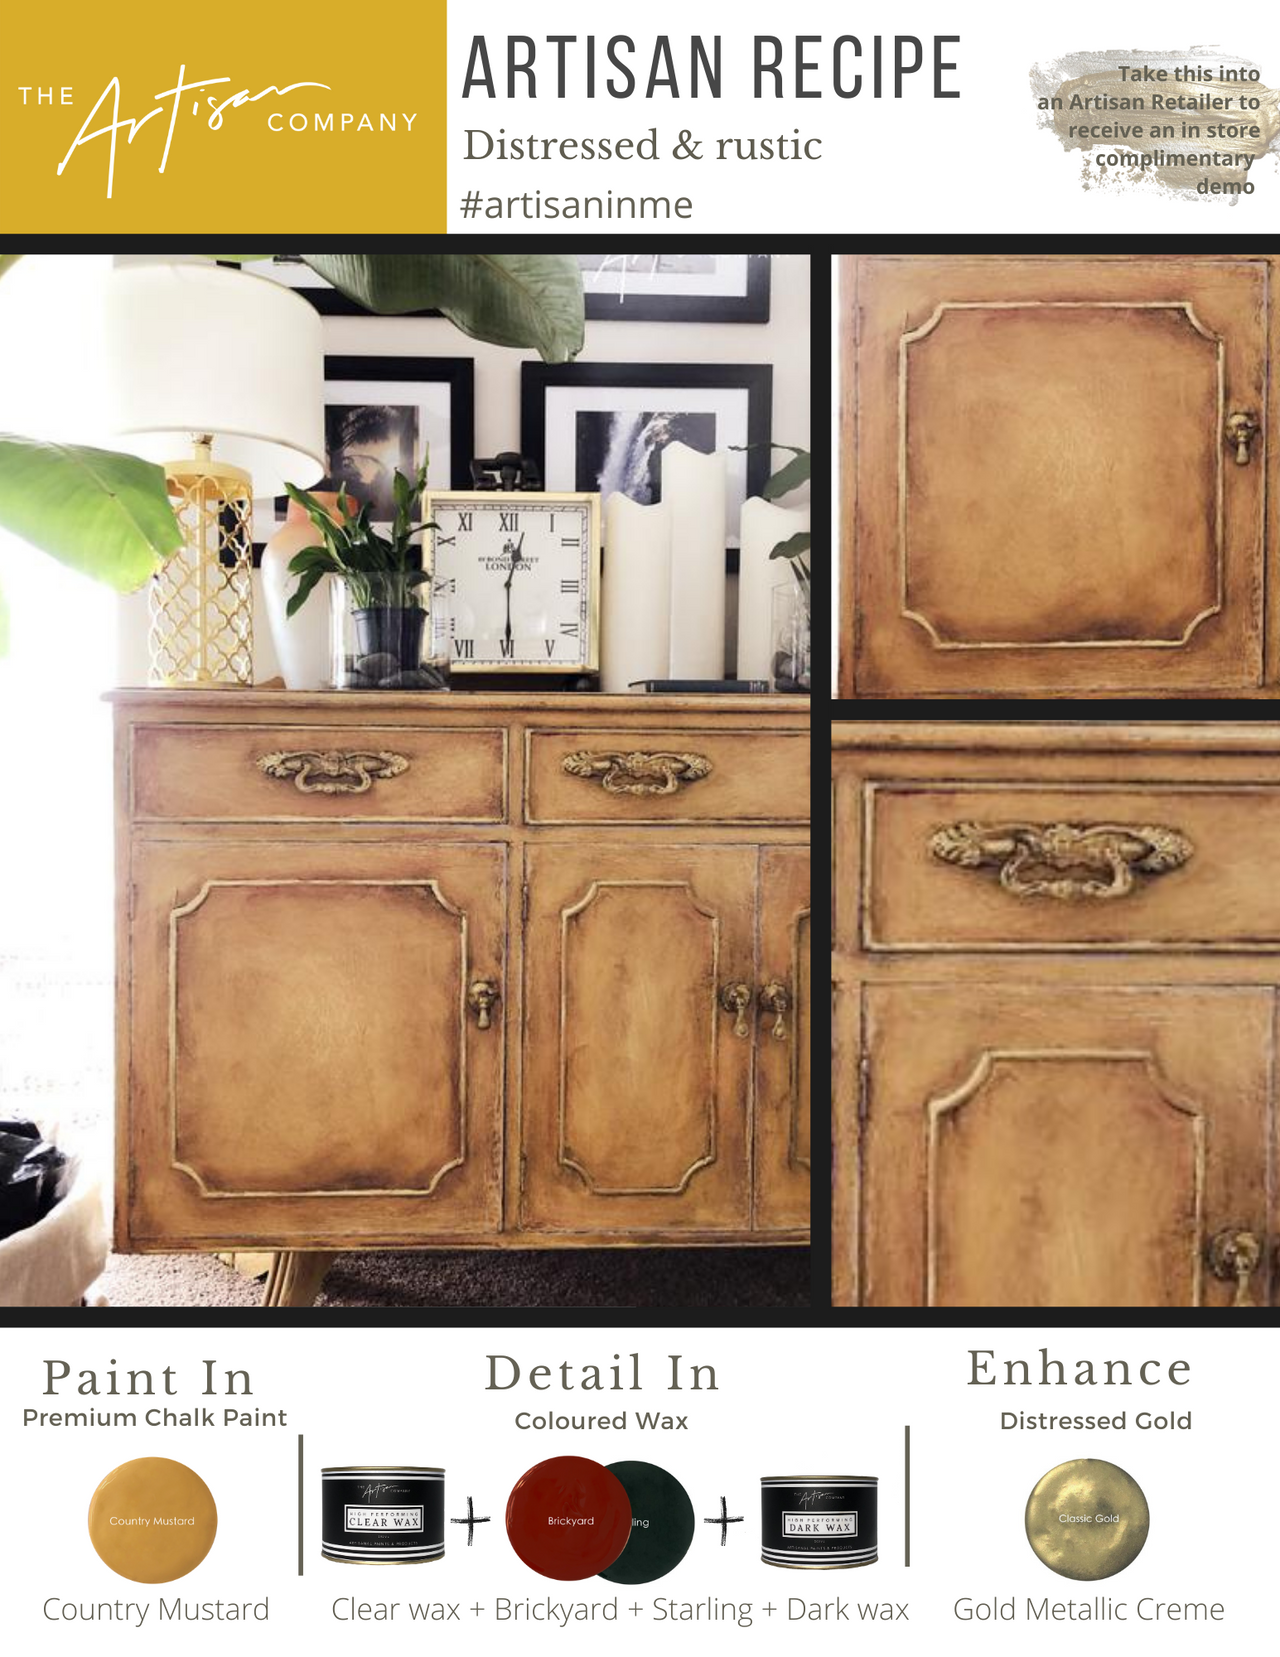 Distressed & Rustic in Country Mustard Chalk Paint Recipe